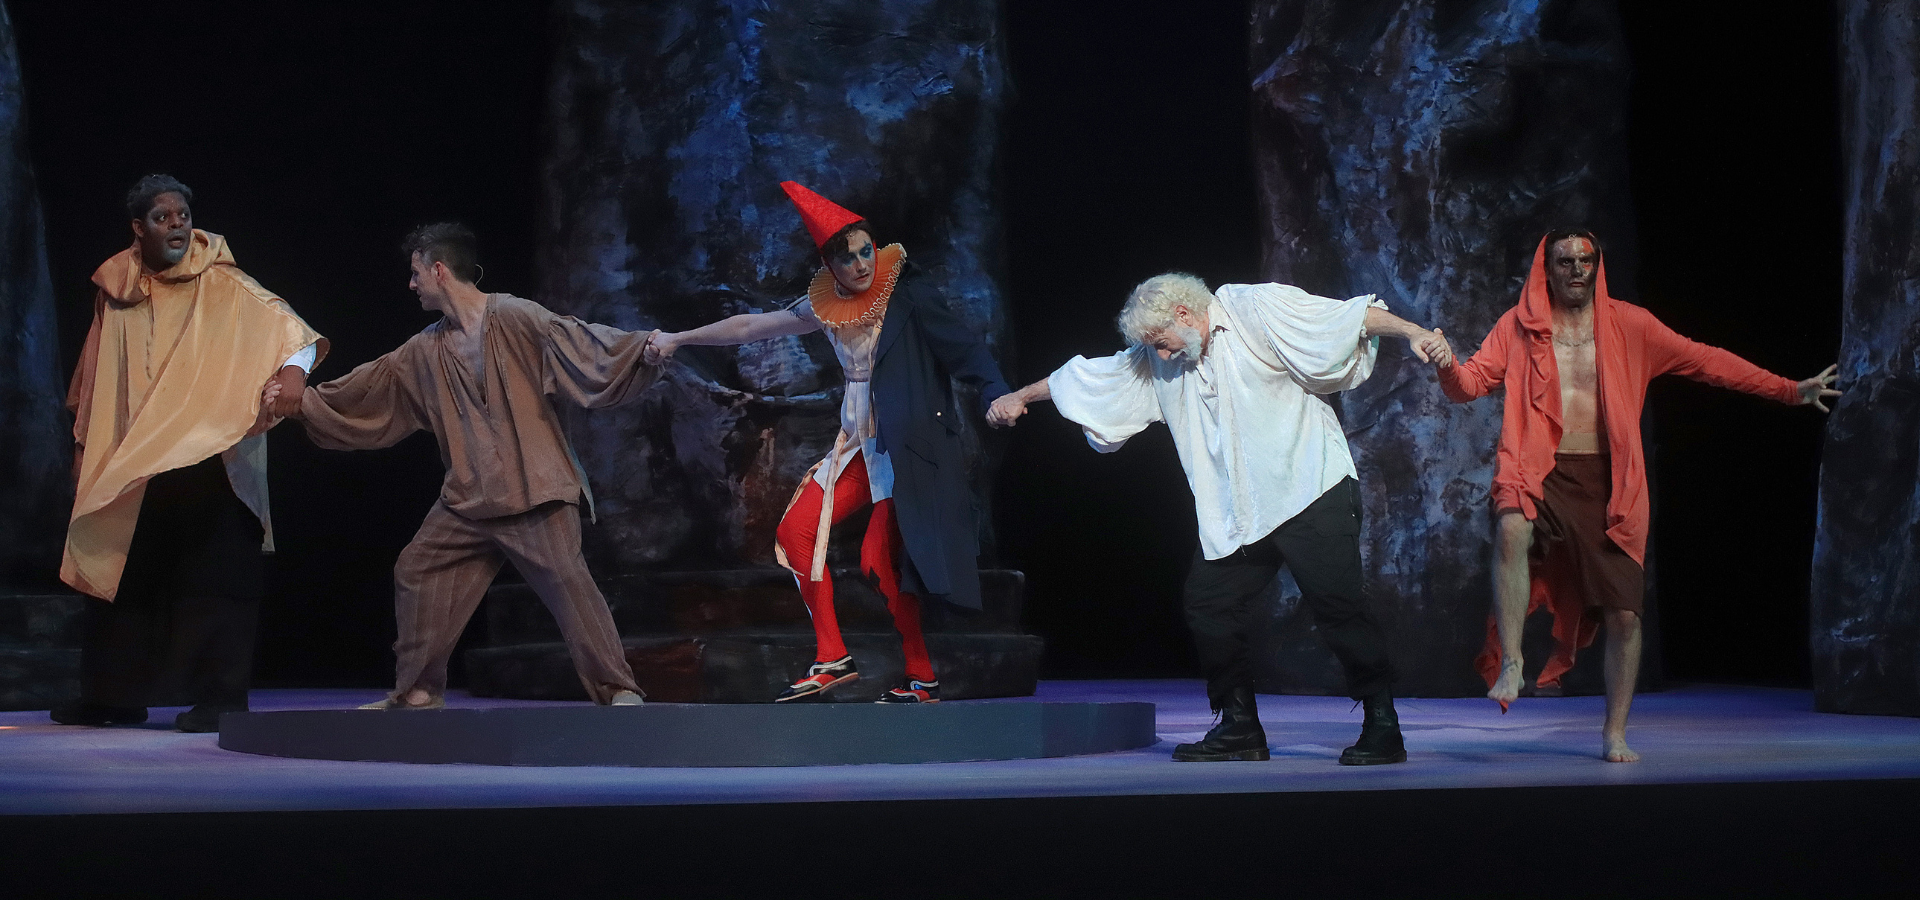 Gloucester and Kent lead the mad Lear, his bedraggled Fool, and Edgar (disguised as Mad Tom) out of the storm into shelter in HSF's 2022 production of King Lear.